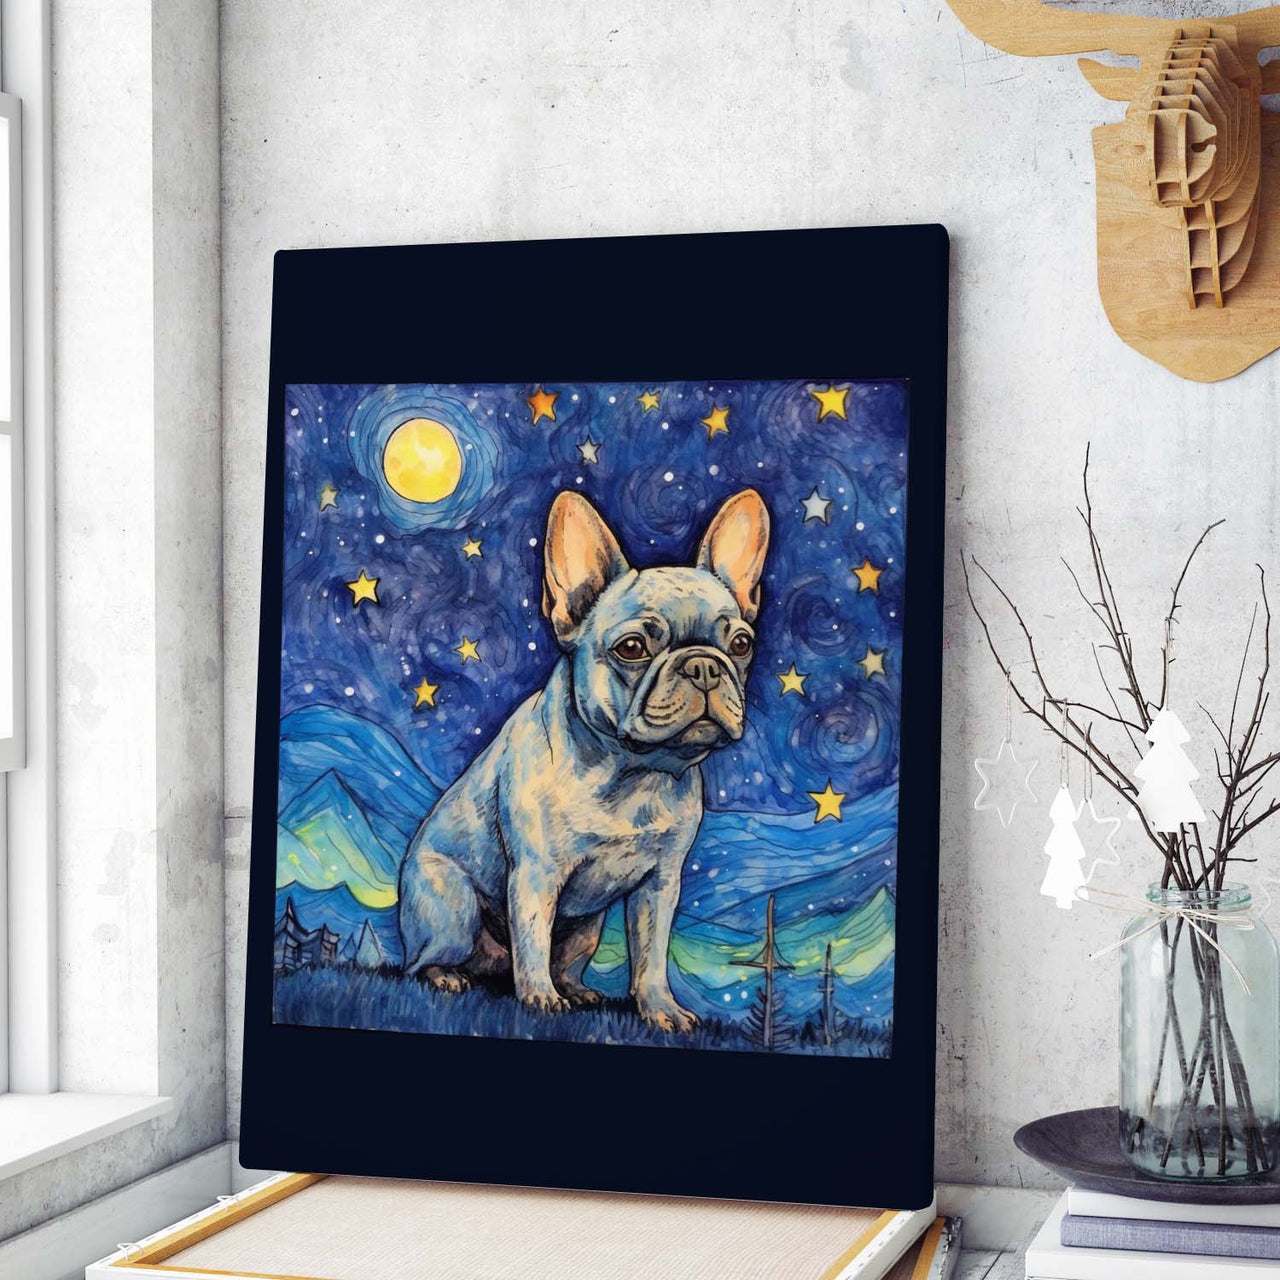 Drawings French Bulldog 02 Van Goh Style Vintage Framed Canvas Prints Wall Art Hanging Home Decor